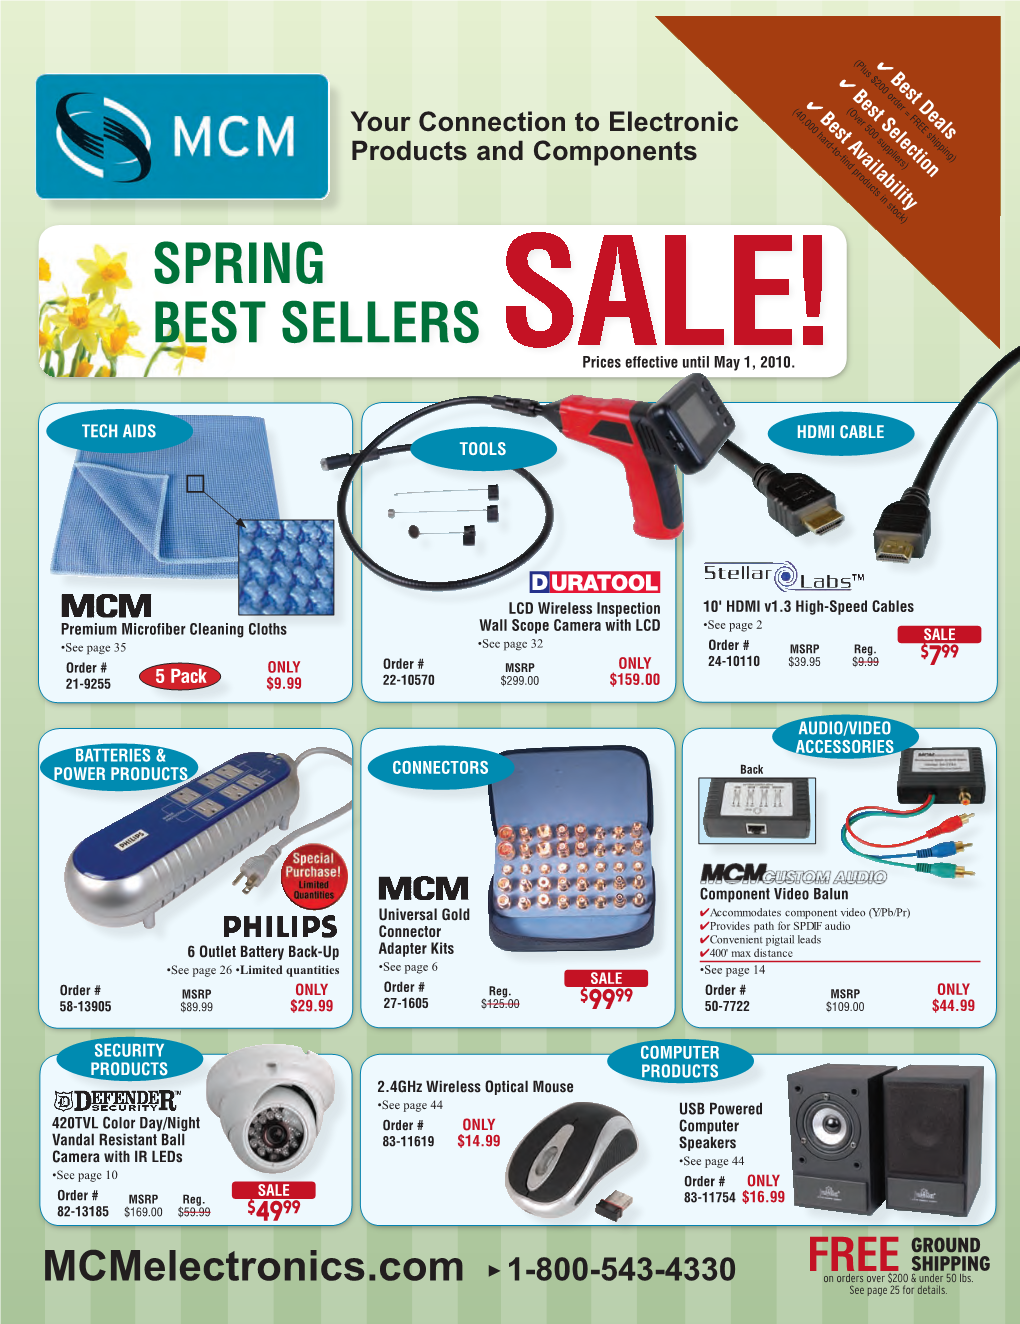 SPRING BEST SELLERS SALE!Prices Effective Until May 1, 2010